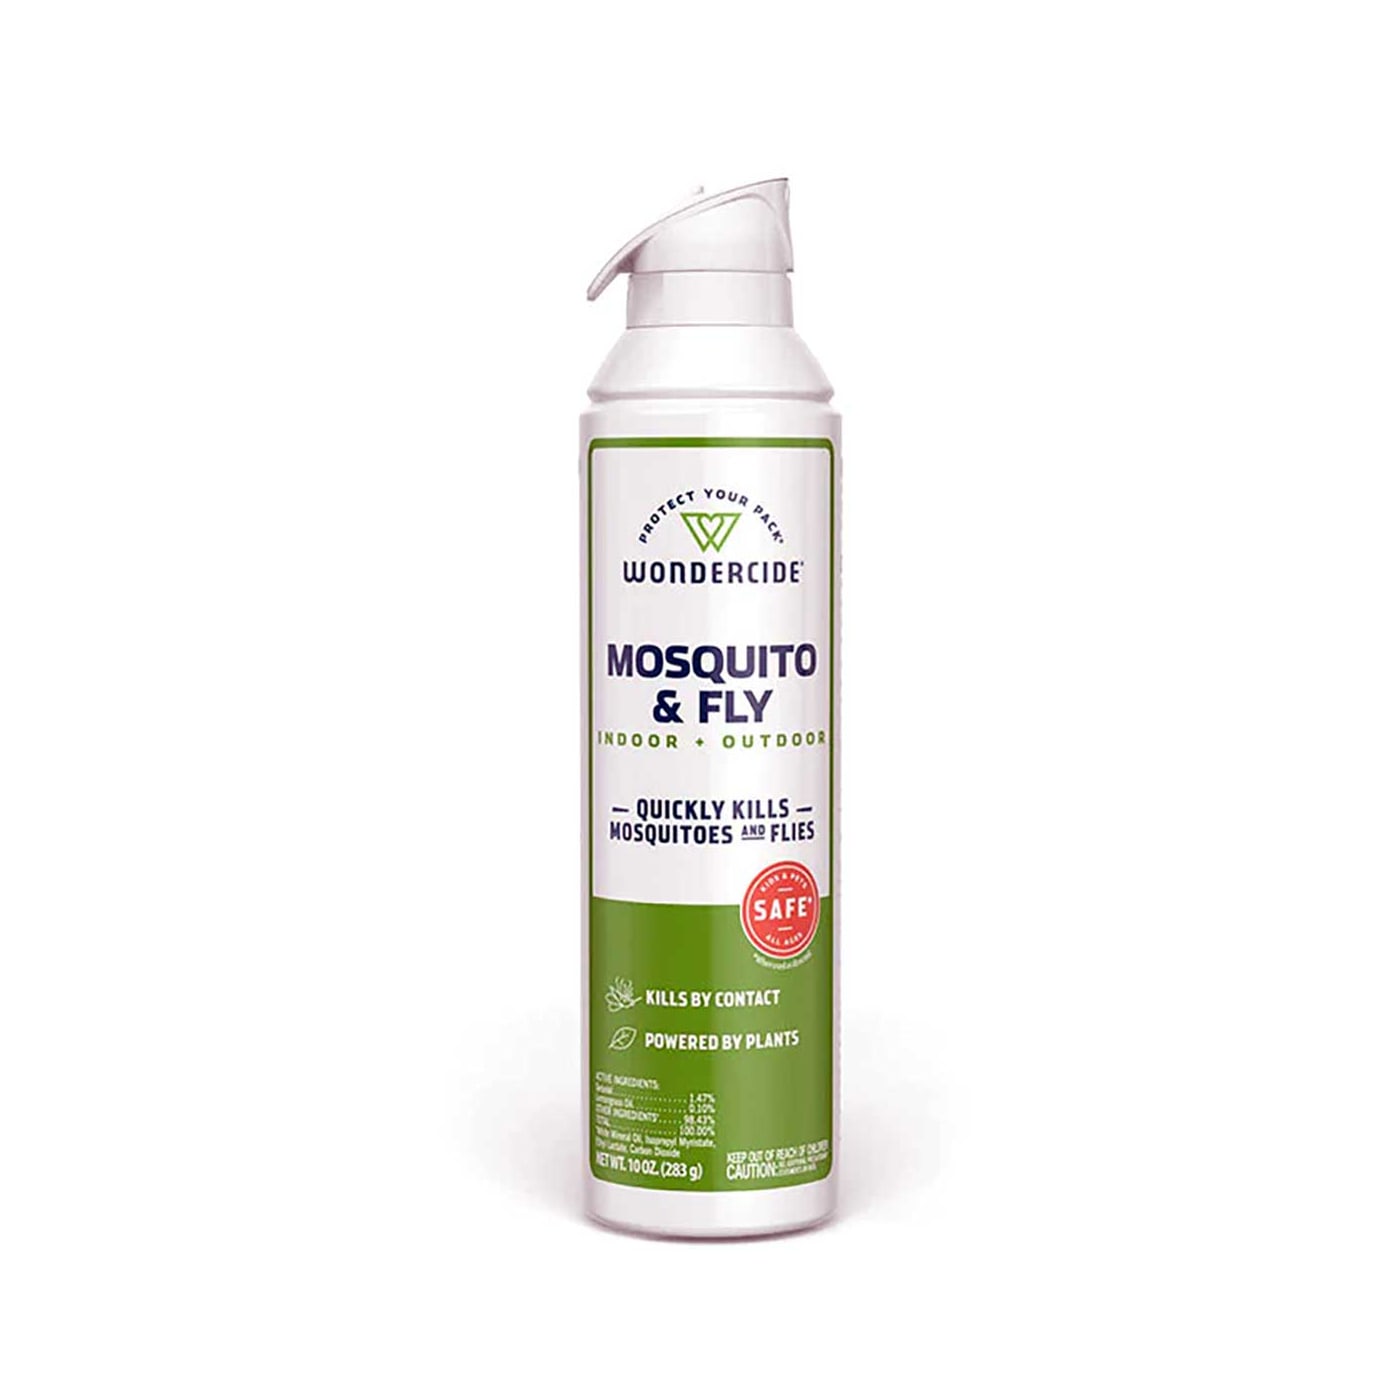 Mosquito & Fly for Indoor + Outdoor with Natural Essential Oils